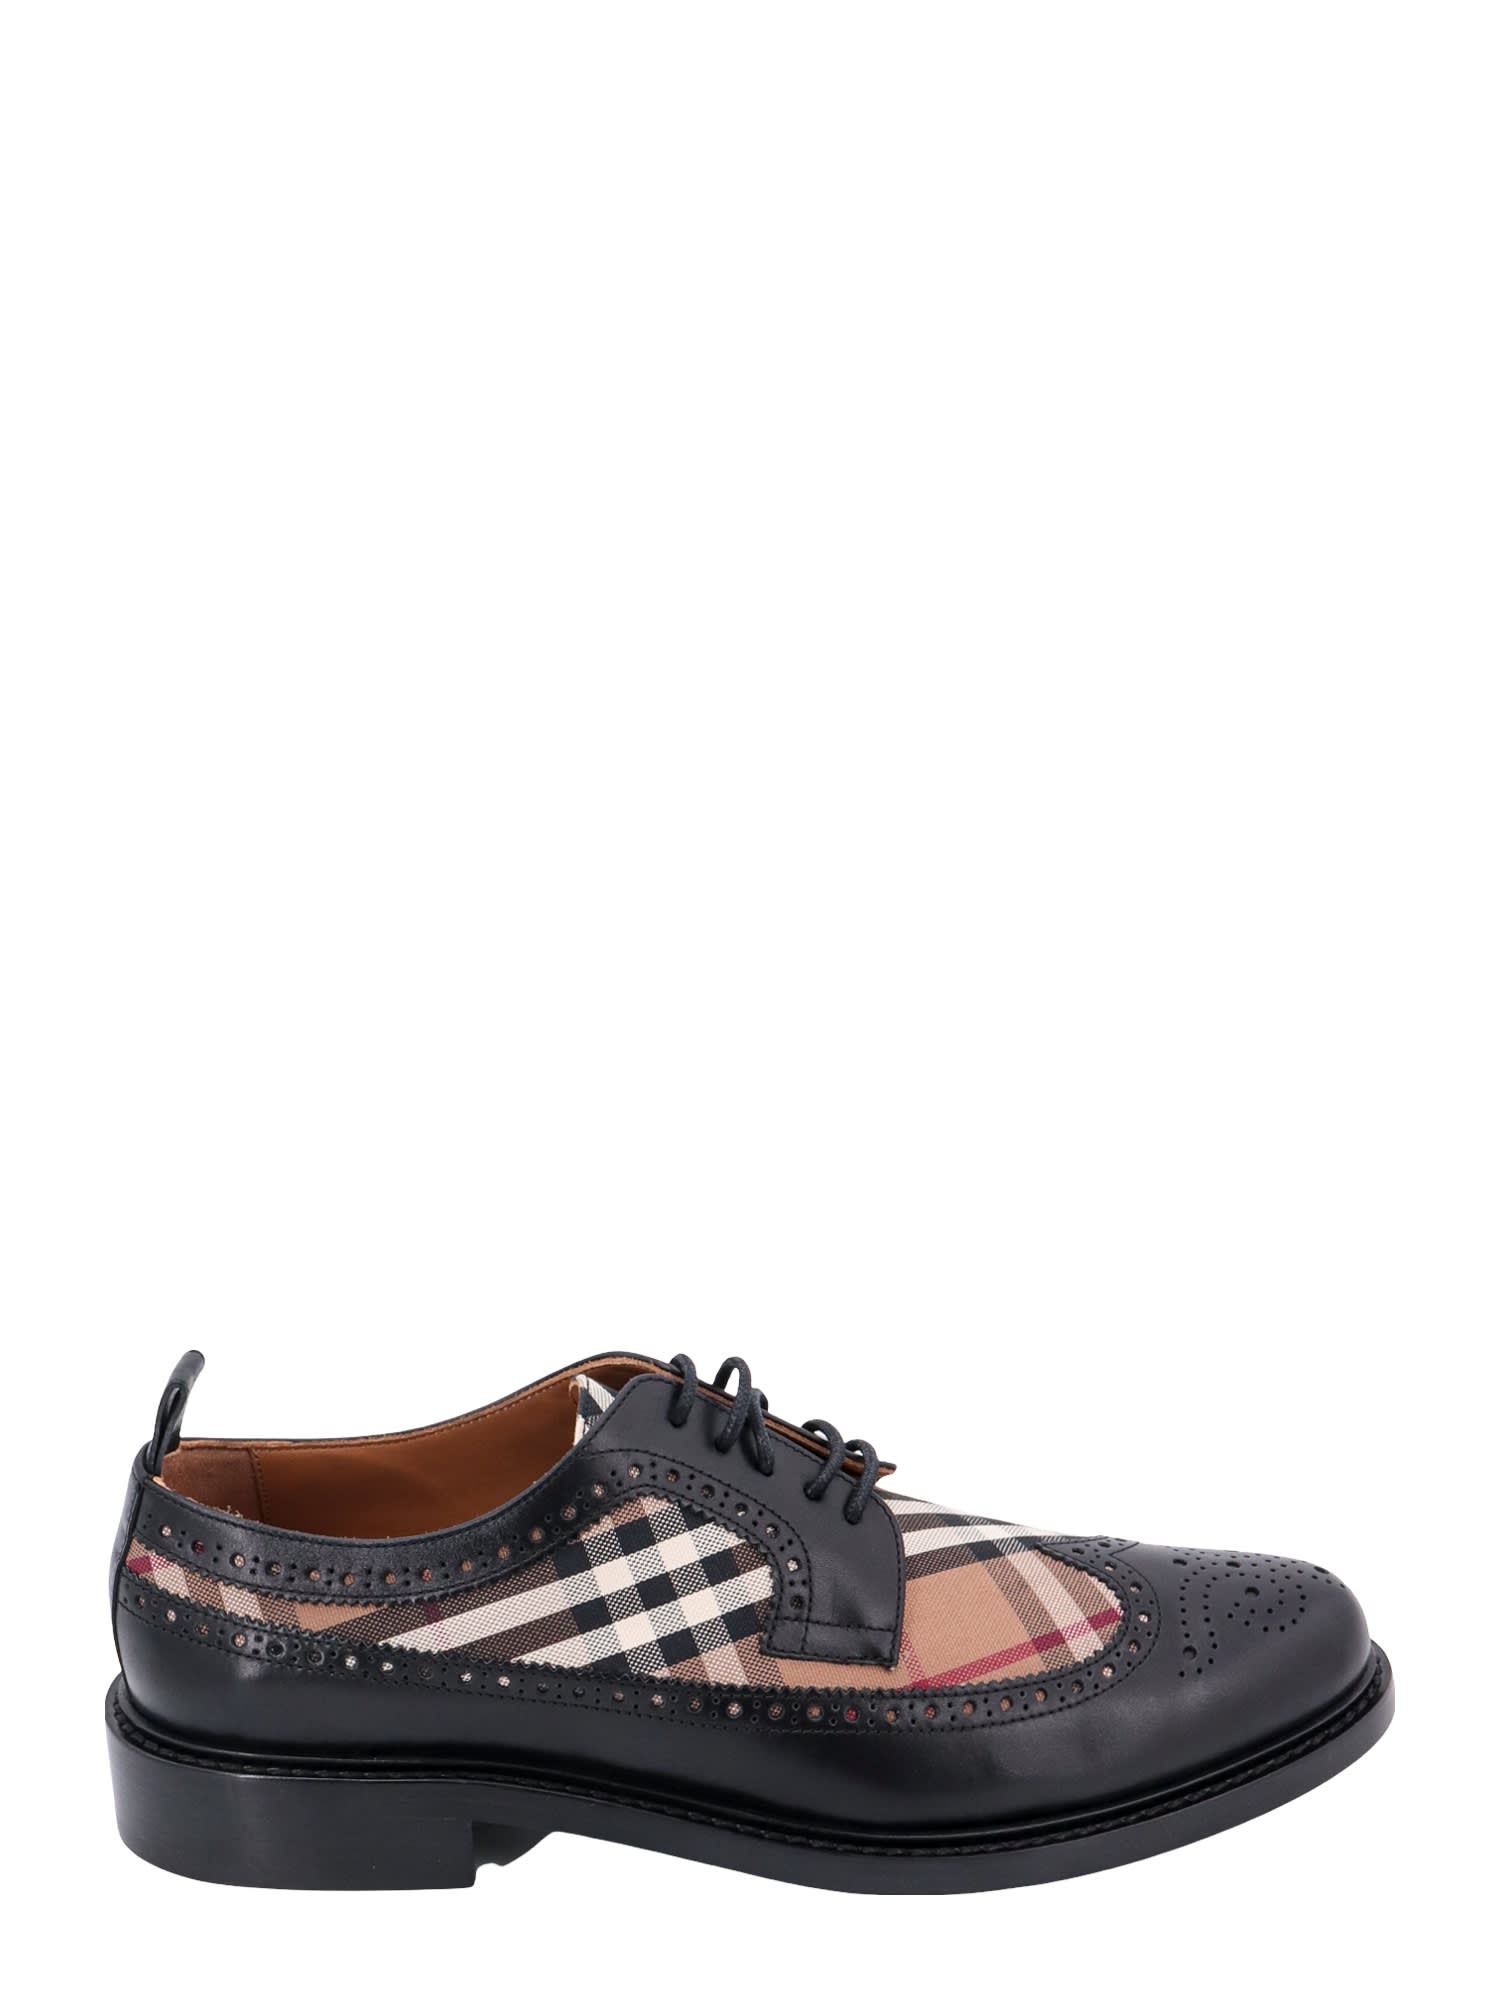 BURBERRY LACE-UP SHOE